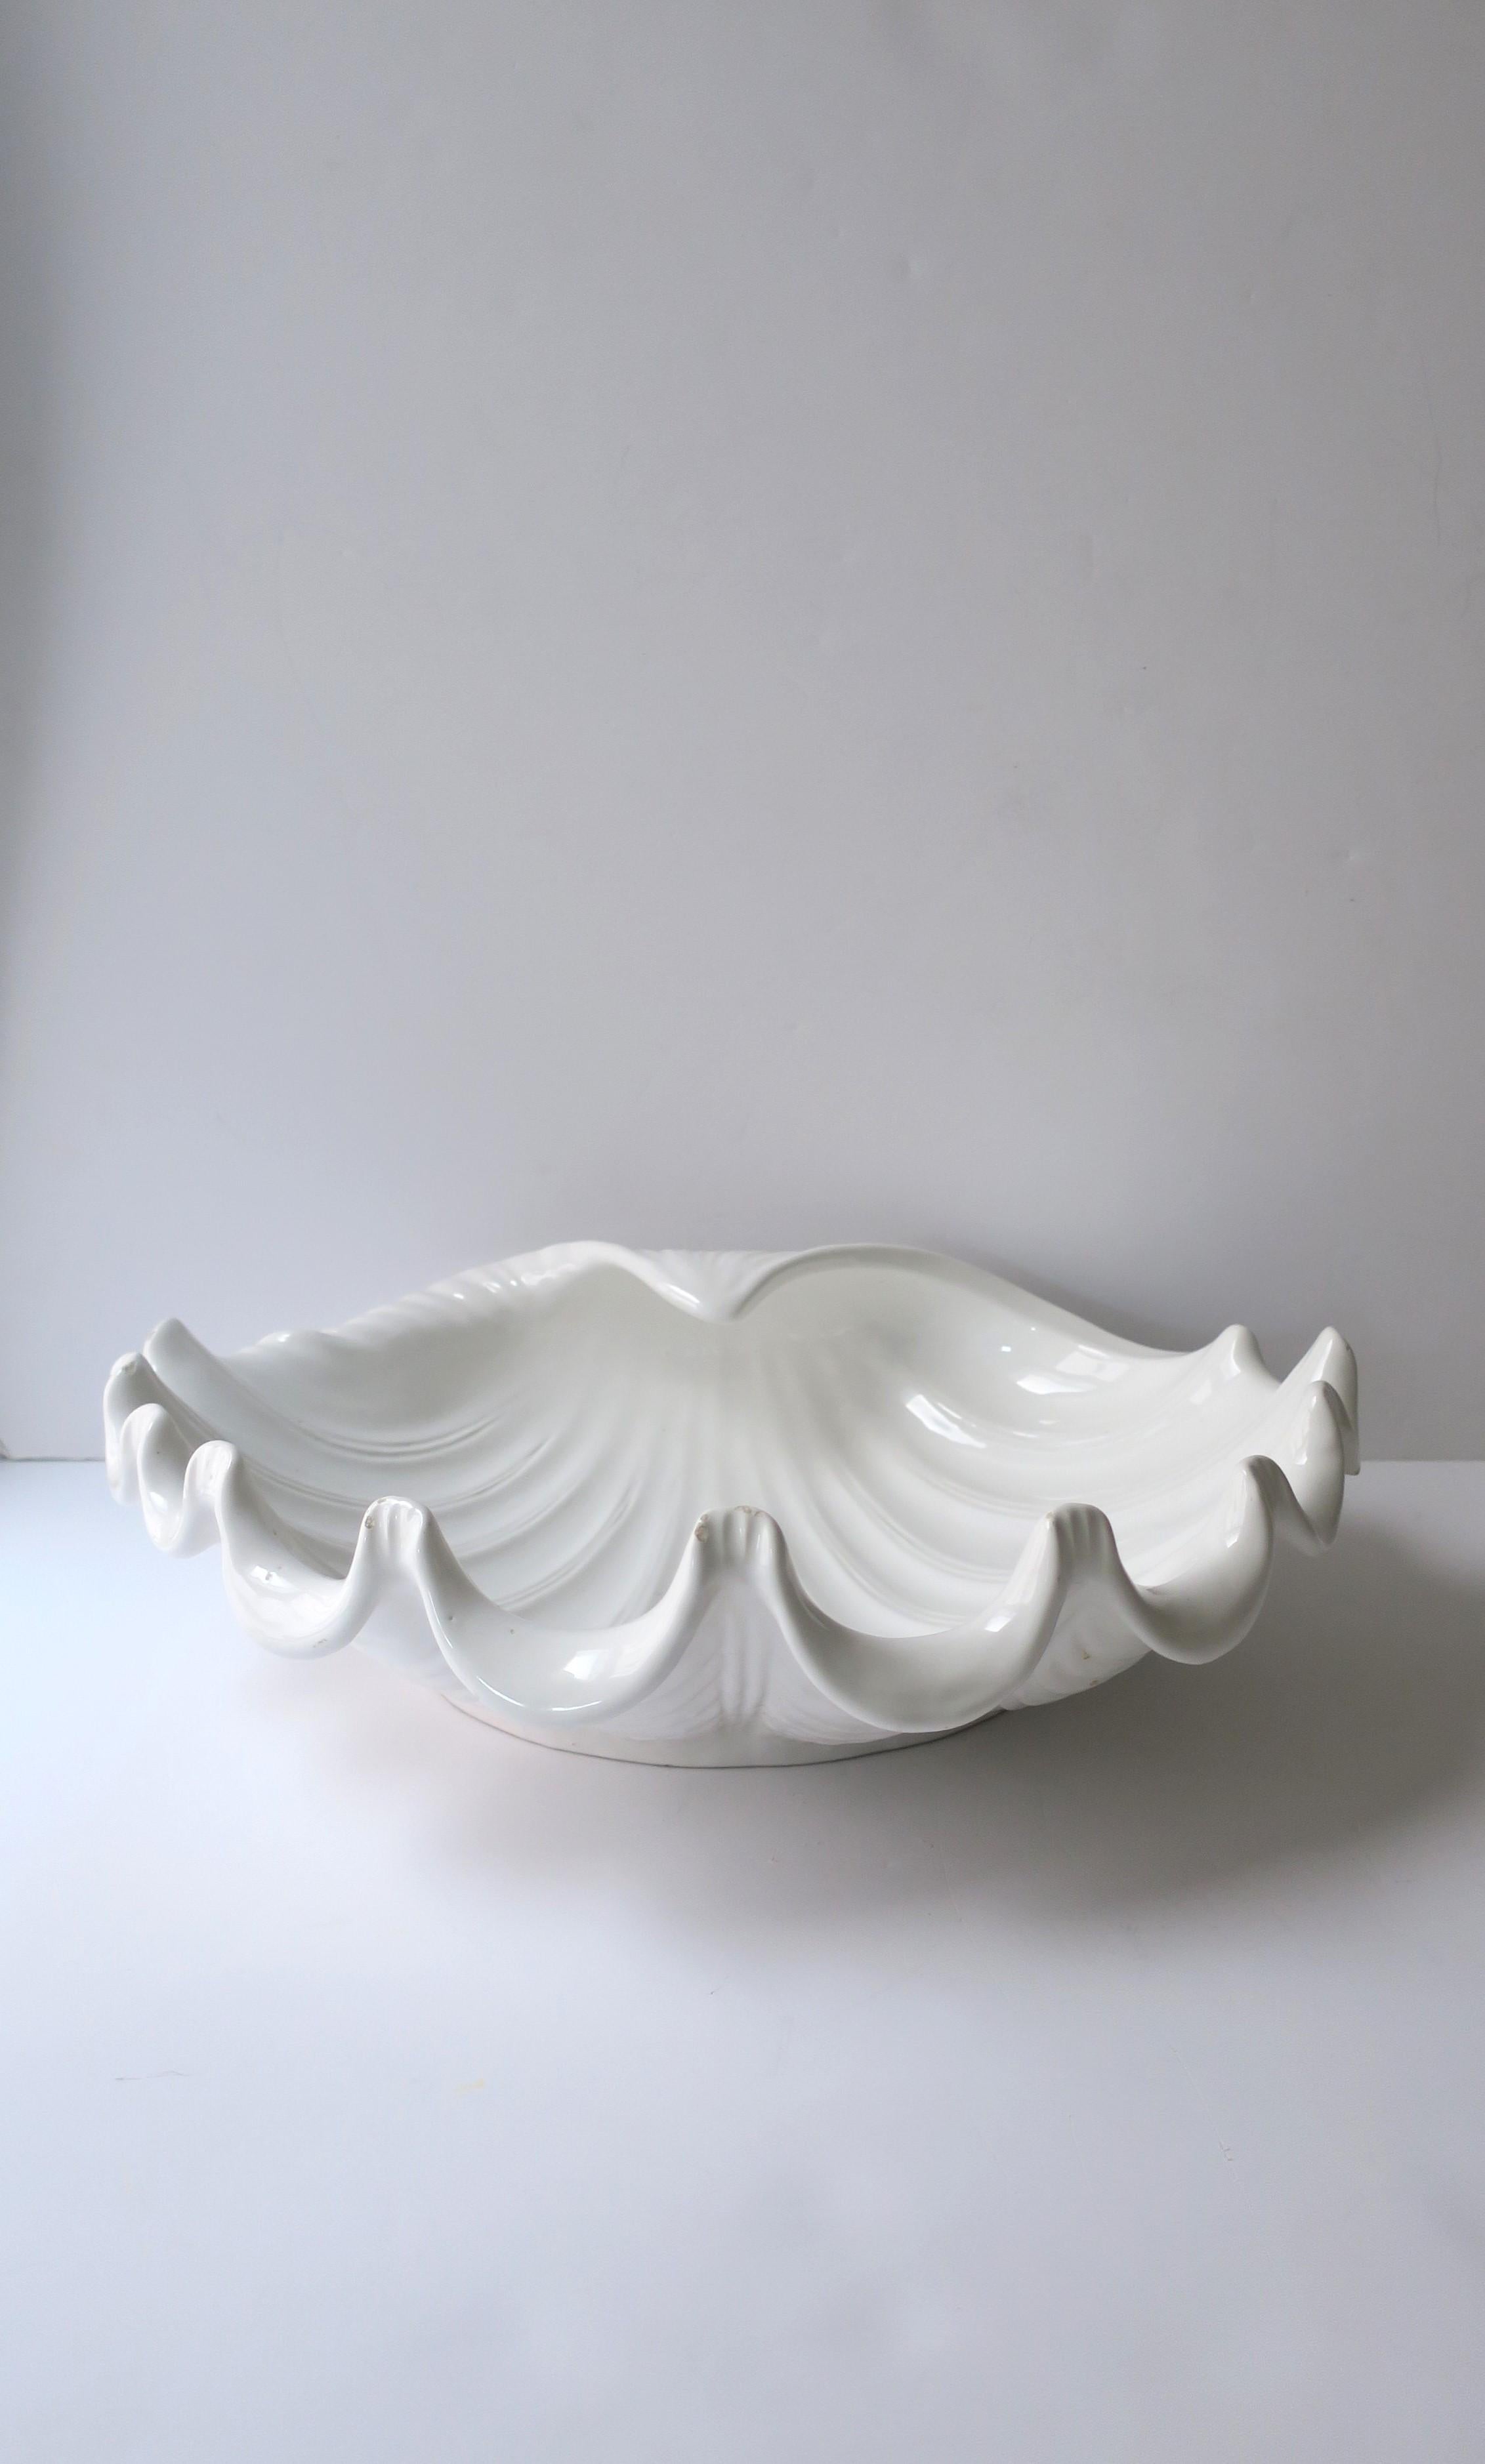 An Italian white ceramic seashell clam shell centerpiece bowl, circa late-20th century, Italy. A detailed white ceramic seashell: great as a standalone piece or fill with your favorite fruits, vegetables, seashells, flowers, etc. Piece is marked